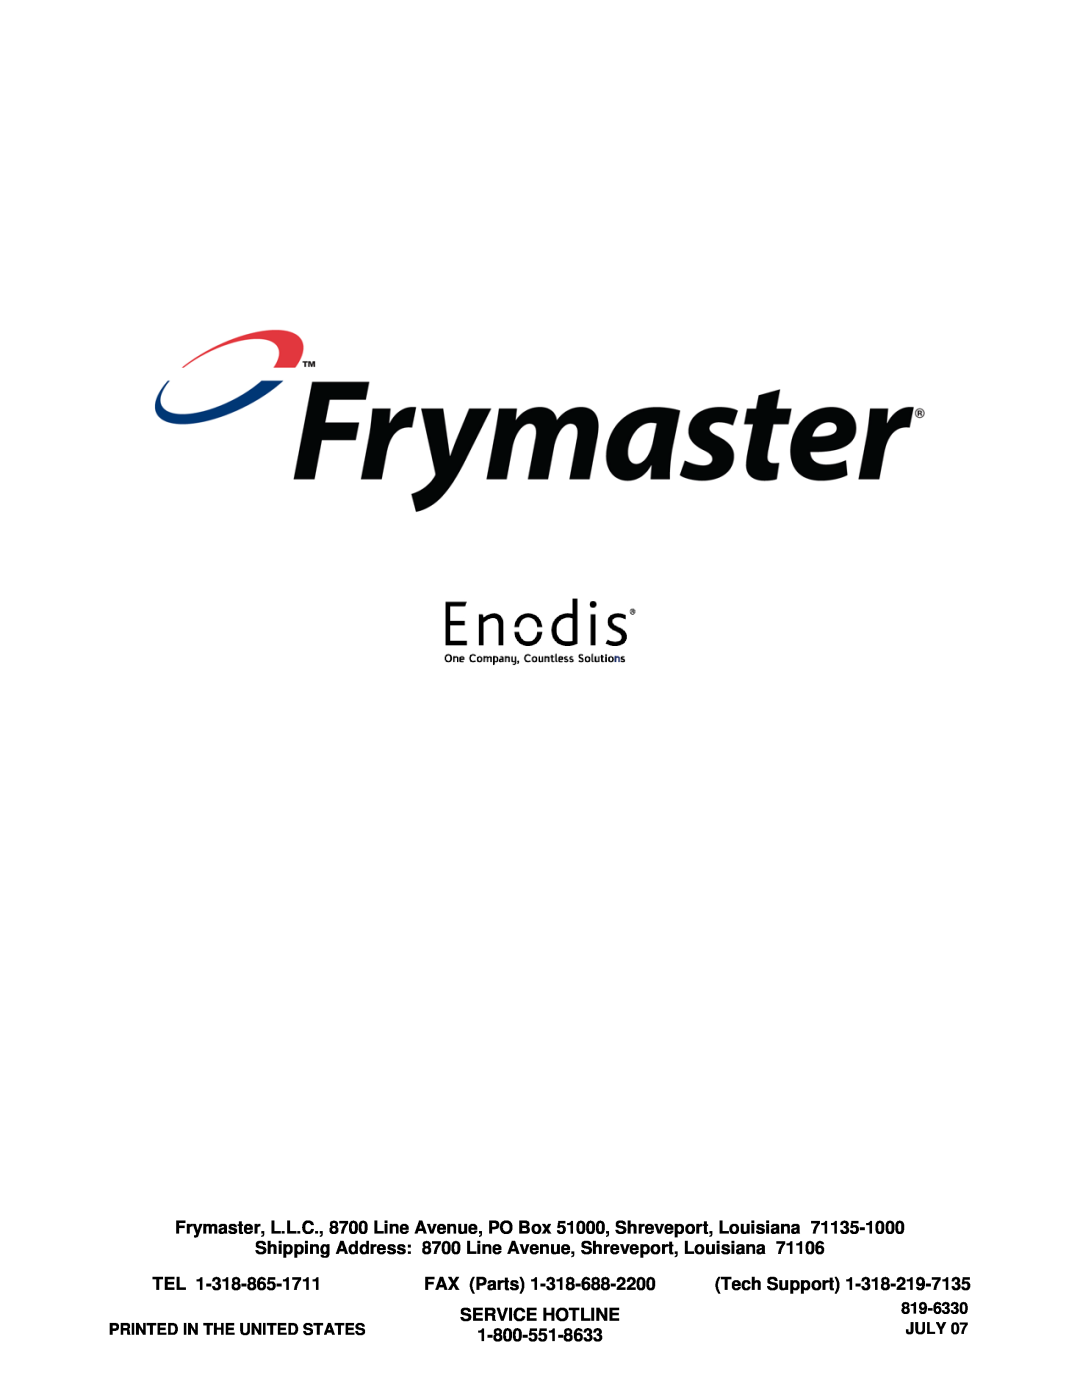 Frymaster FWH-1, ThermoGlo, FWH-2, Hatco manual FAX Parts, Tech Support, Service Hotline, 819-6330, July 